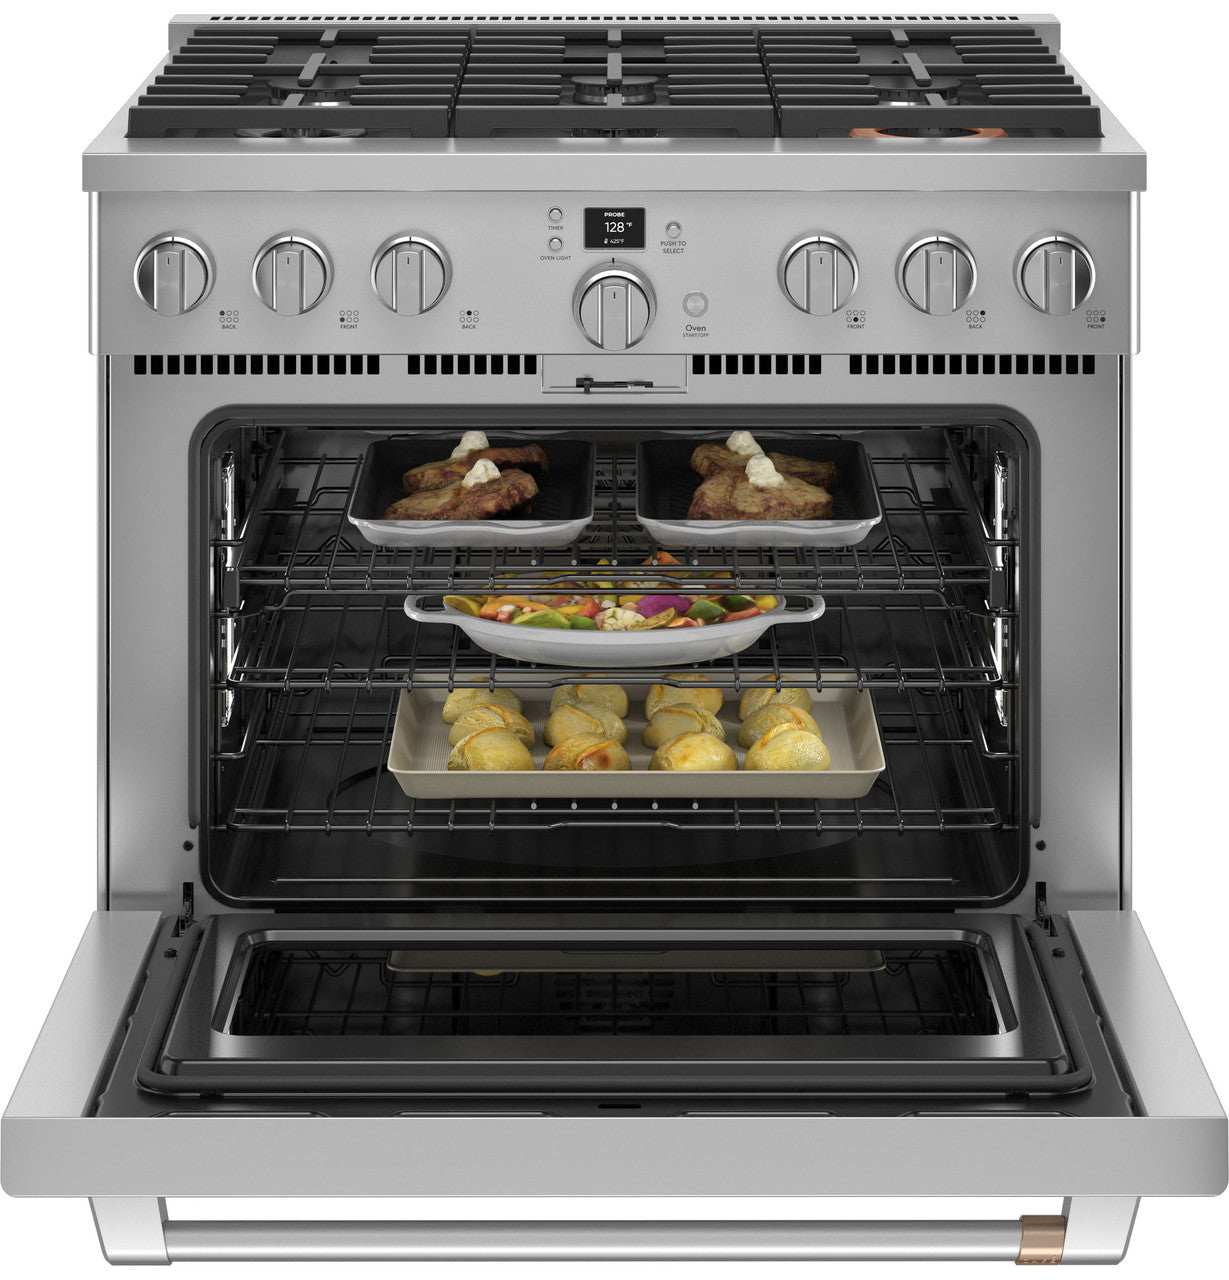 Café - 6.2 cu. ft  Gas Range in Stainless - CGY366P2TS1